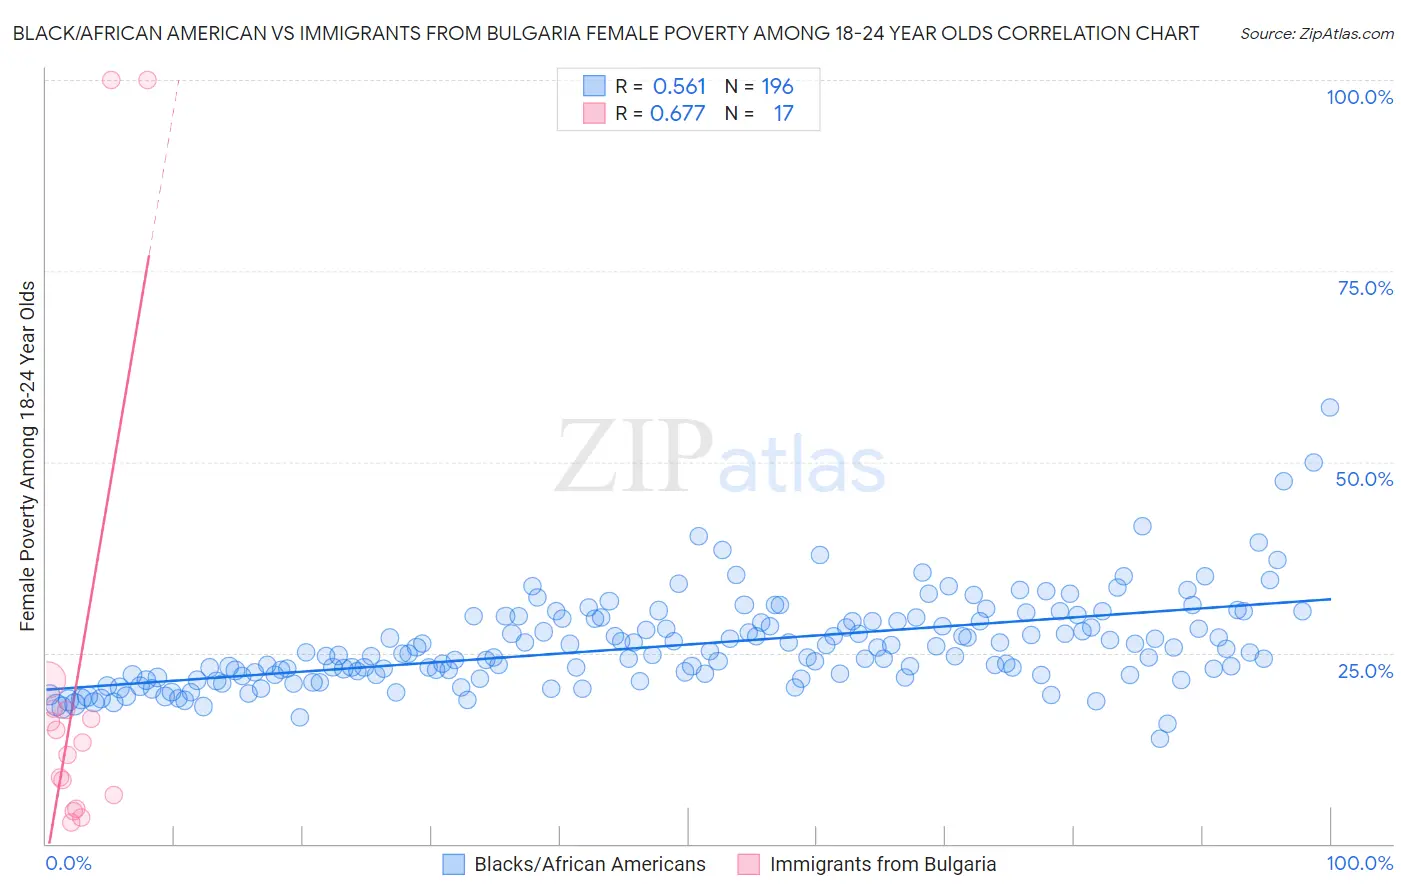 Black/African American vs Immigrants from Bulgaria Female Poverty Among 18-24 Year Olds